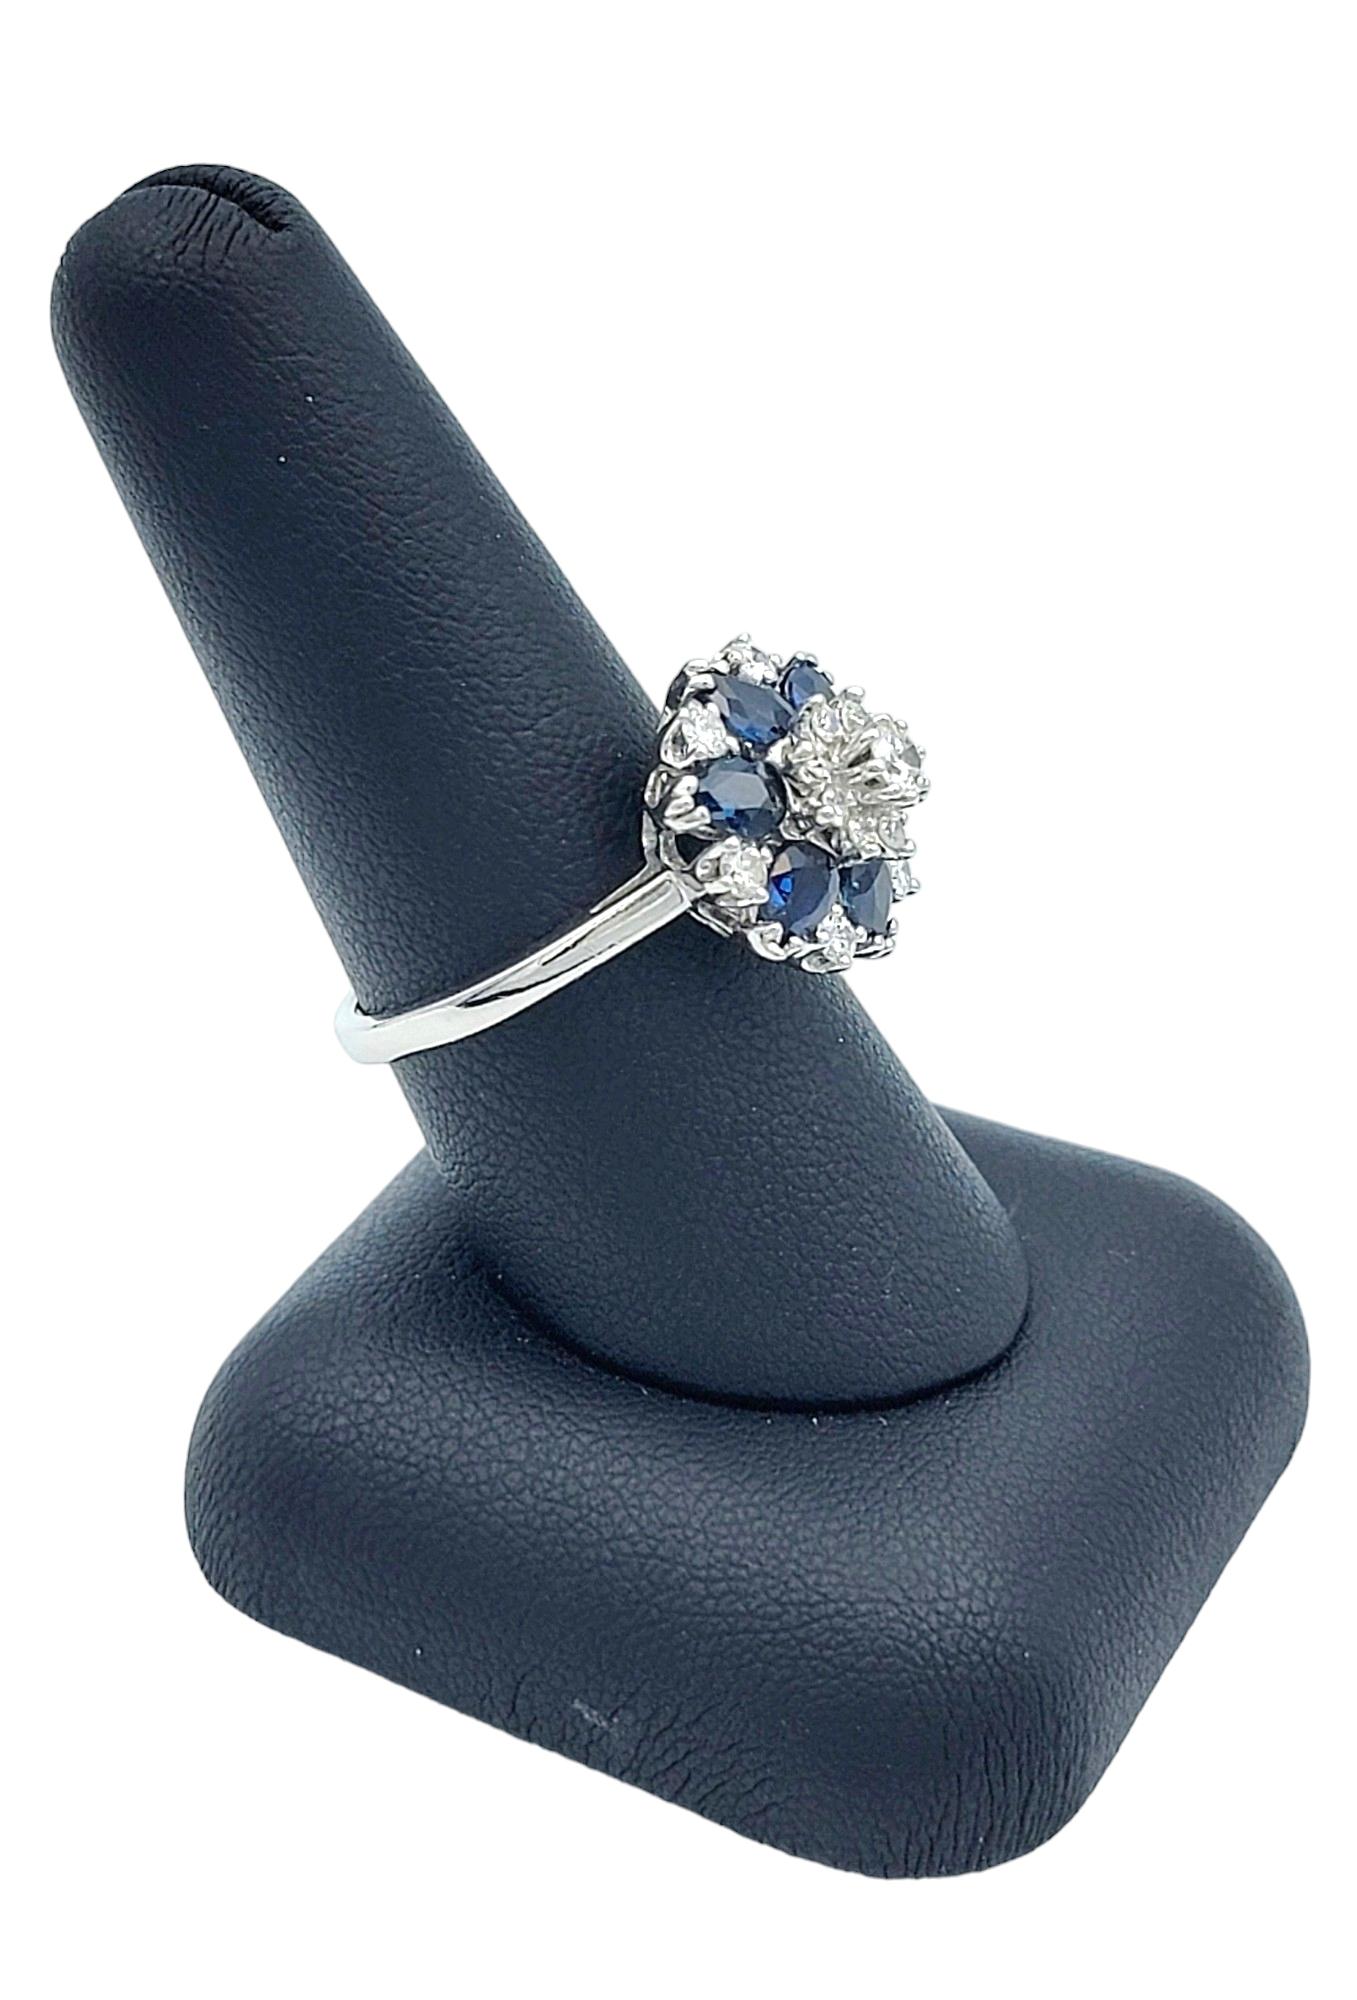 Blue Sapphire and Diamond Flower Motif Cocktail Ring Set in 14 Karat White Gold For Sale 2